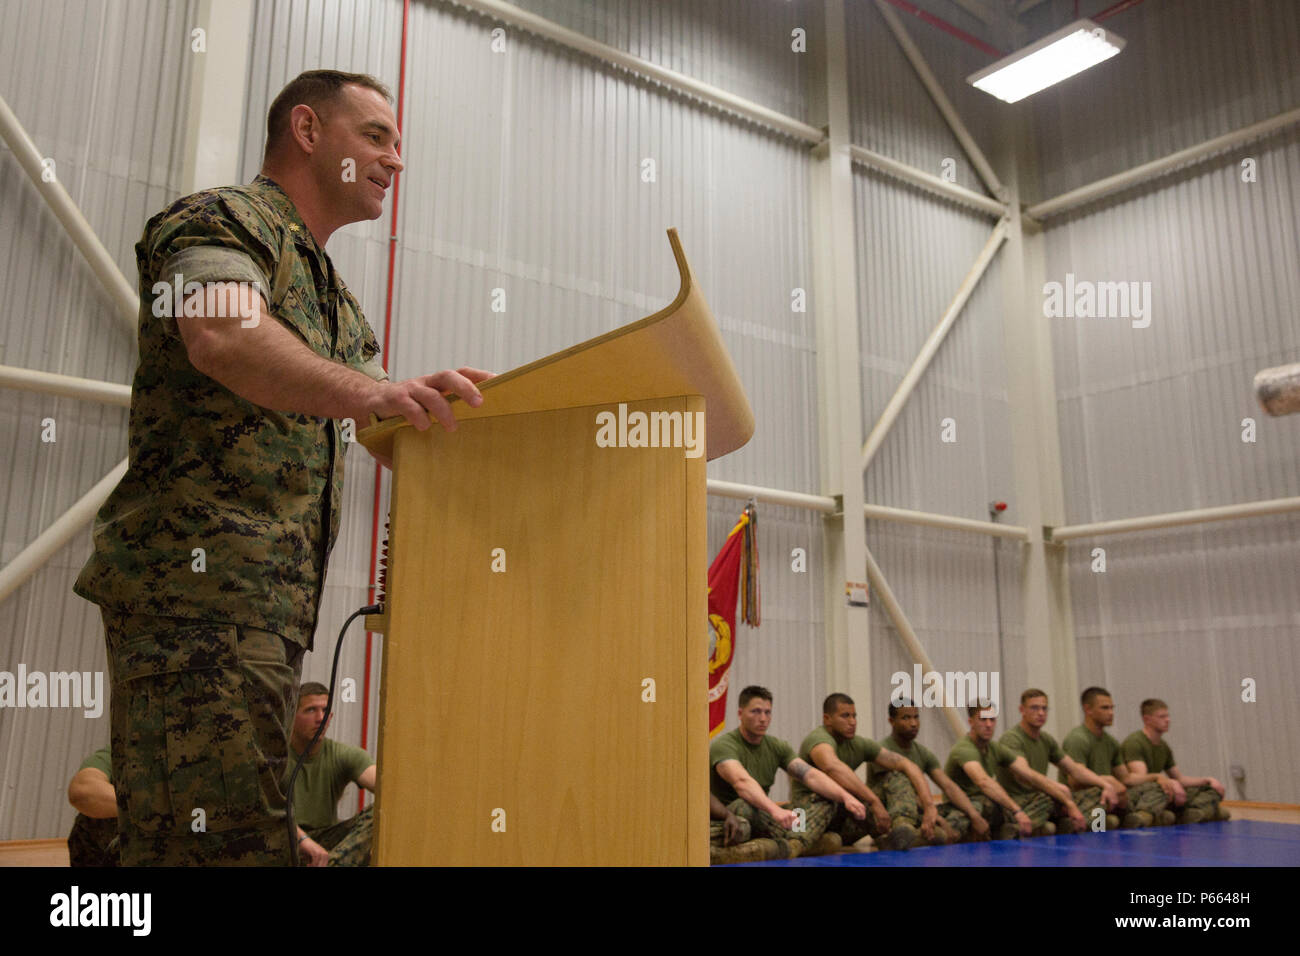 U.S. Marine Corps Maj. Christopher M. Reynolds, the executive officer of Black Sea Rotational Force, gives his remarks during the first Marine Corps Martial Arts Instructor Course held for BSRF 16.1 aboard Mihail Kognalniceanu Air Base, Romania, April 22, 2016. These graduates spent three weeks enduring physical training sessions, learning how to correctly give hip-pocket classes, and how to properly teach techniques of all belt levels of the Marine Corps Martial-Arts Program. (U.S. Marine Corps photo by Cpl. Kelly L. Street, 2D MARDIV COMCAM/Released) Stock Photo